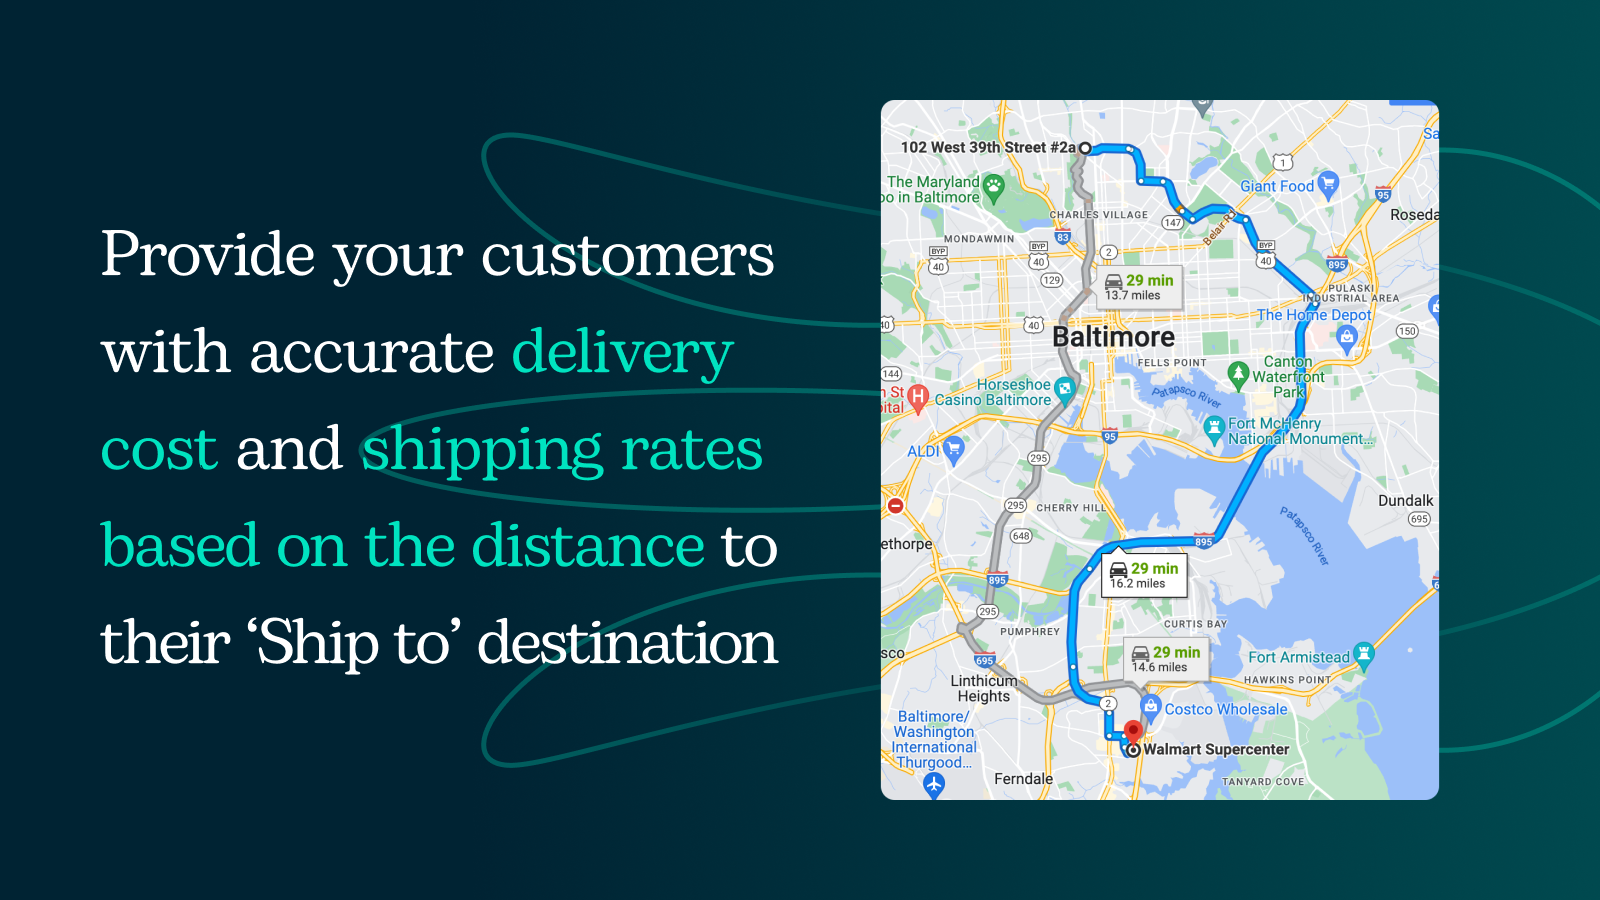 Accurate shipping rates and delivery cost based on distance